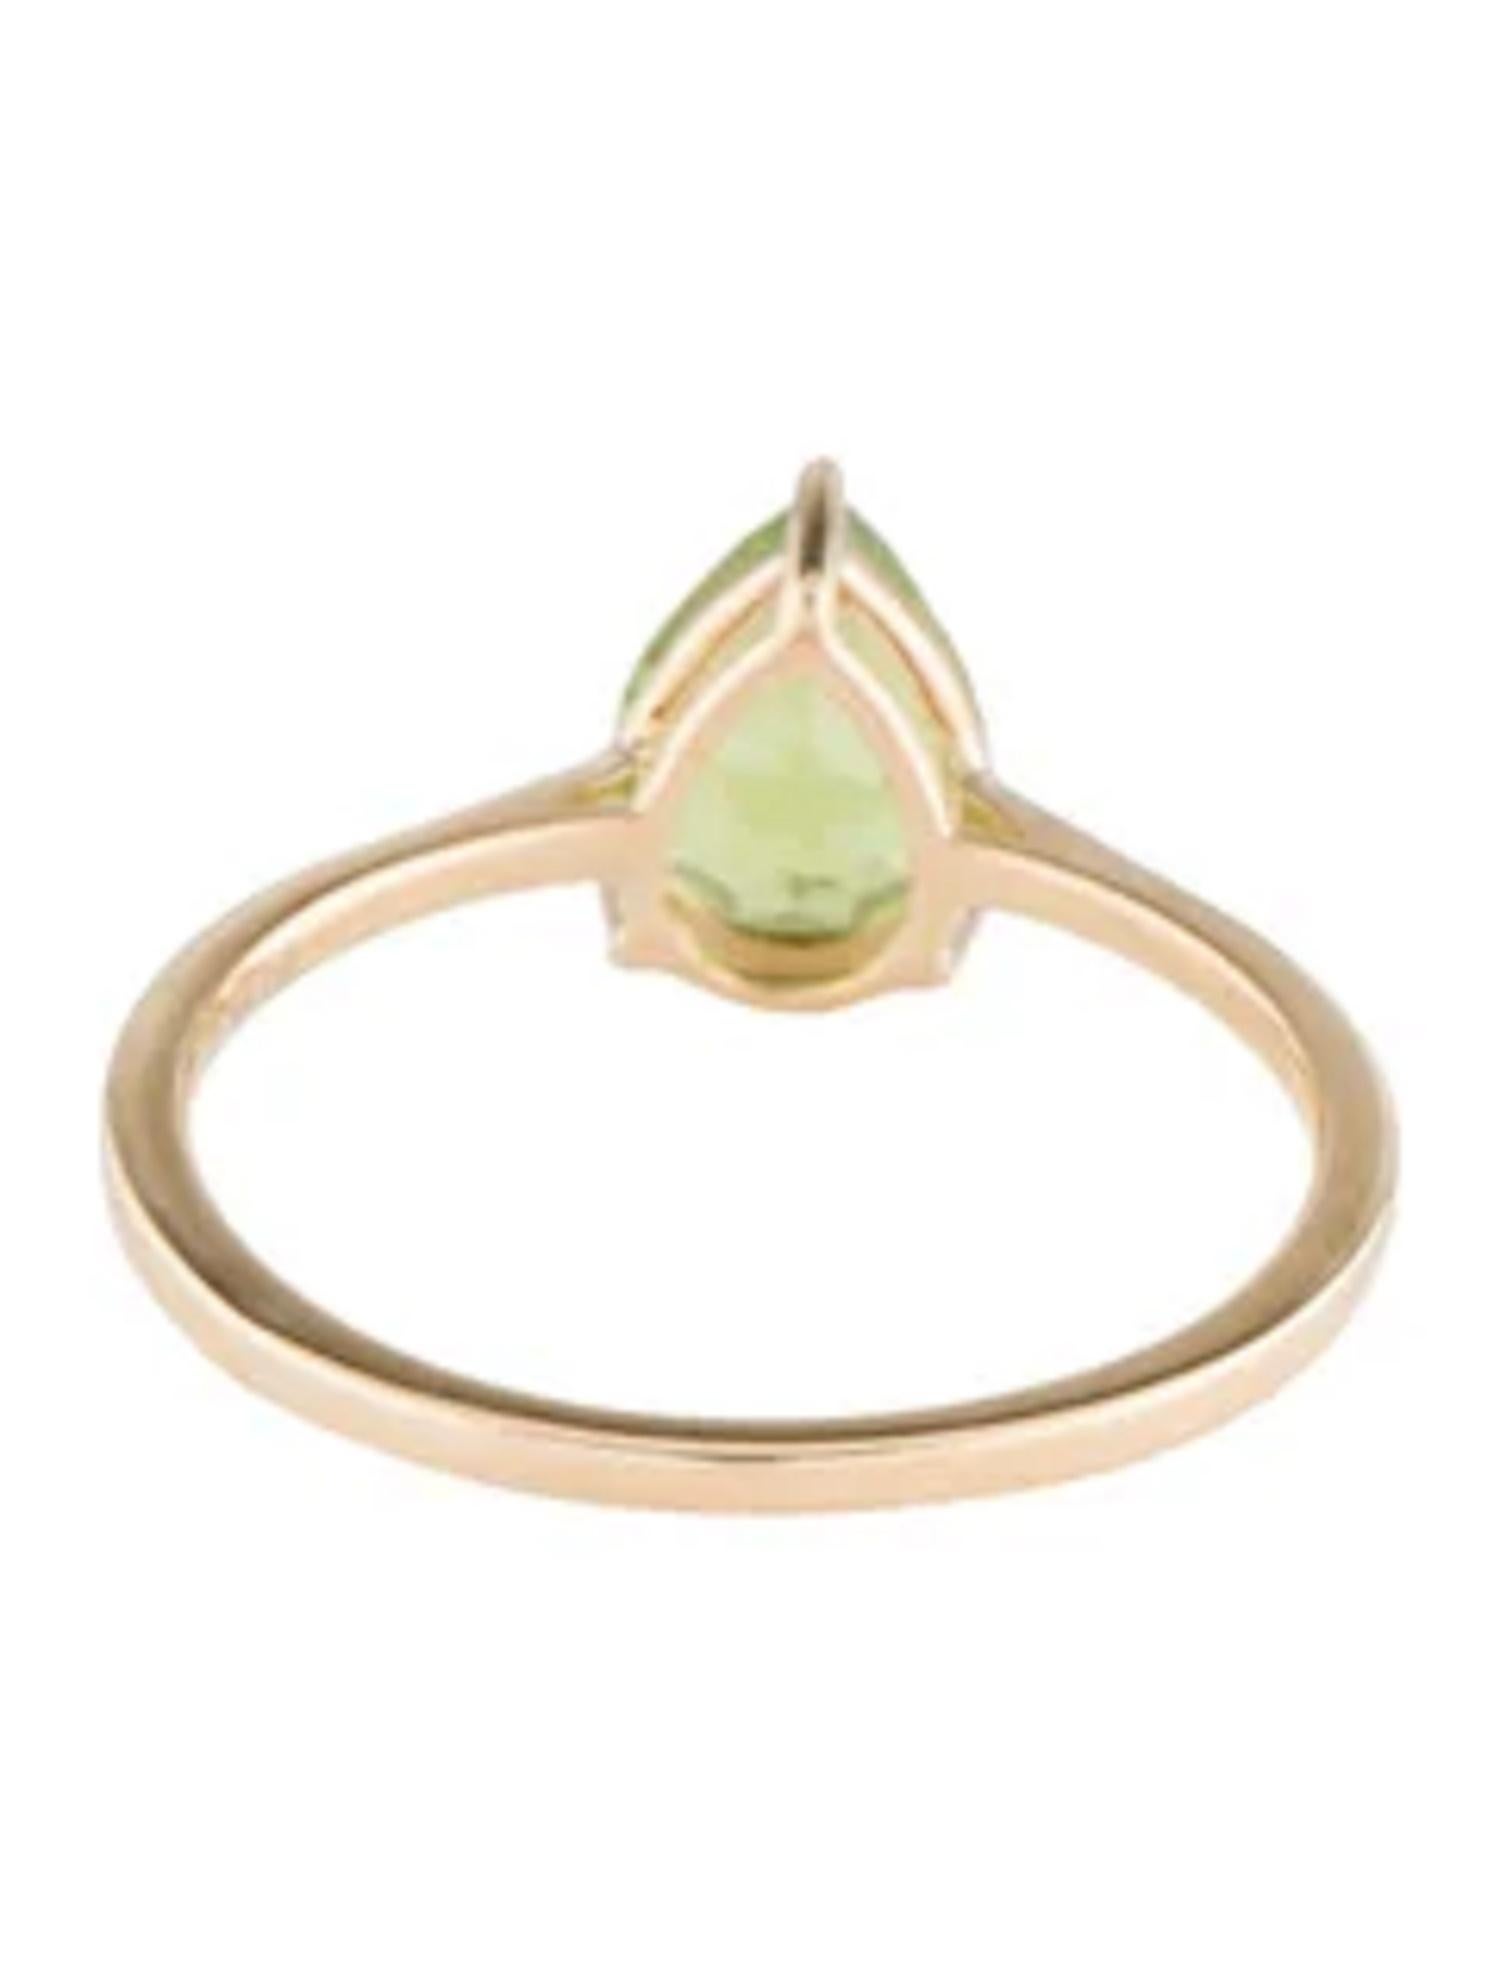 14K Yellow Gold Peridot Cocktail Ring - Pear Modified Brilliant Design In New Condition For Sale In Holtsville, NY